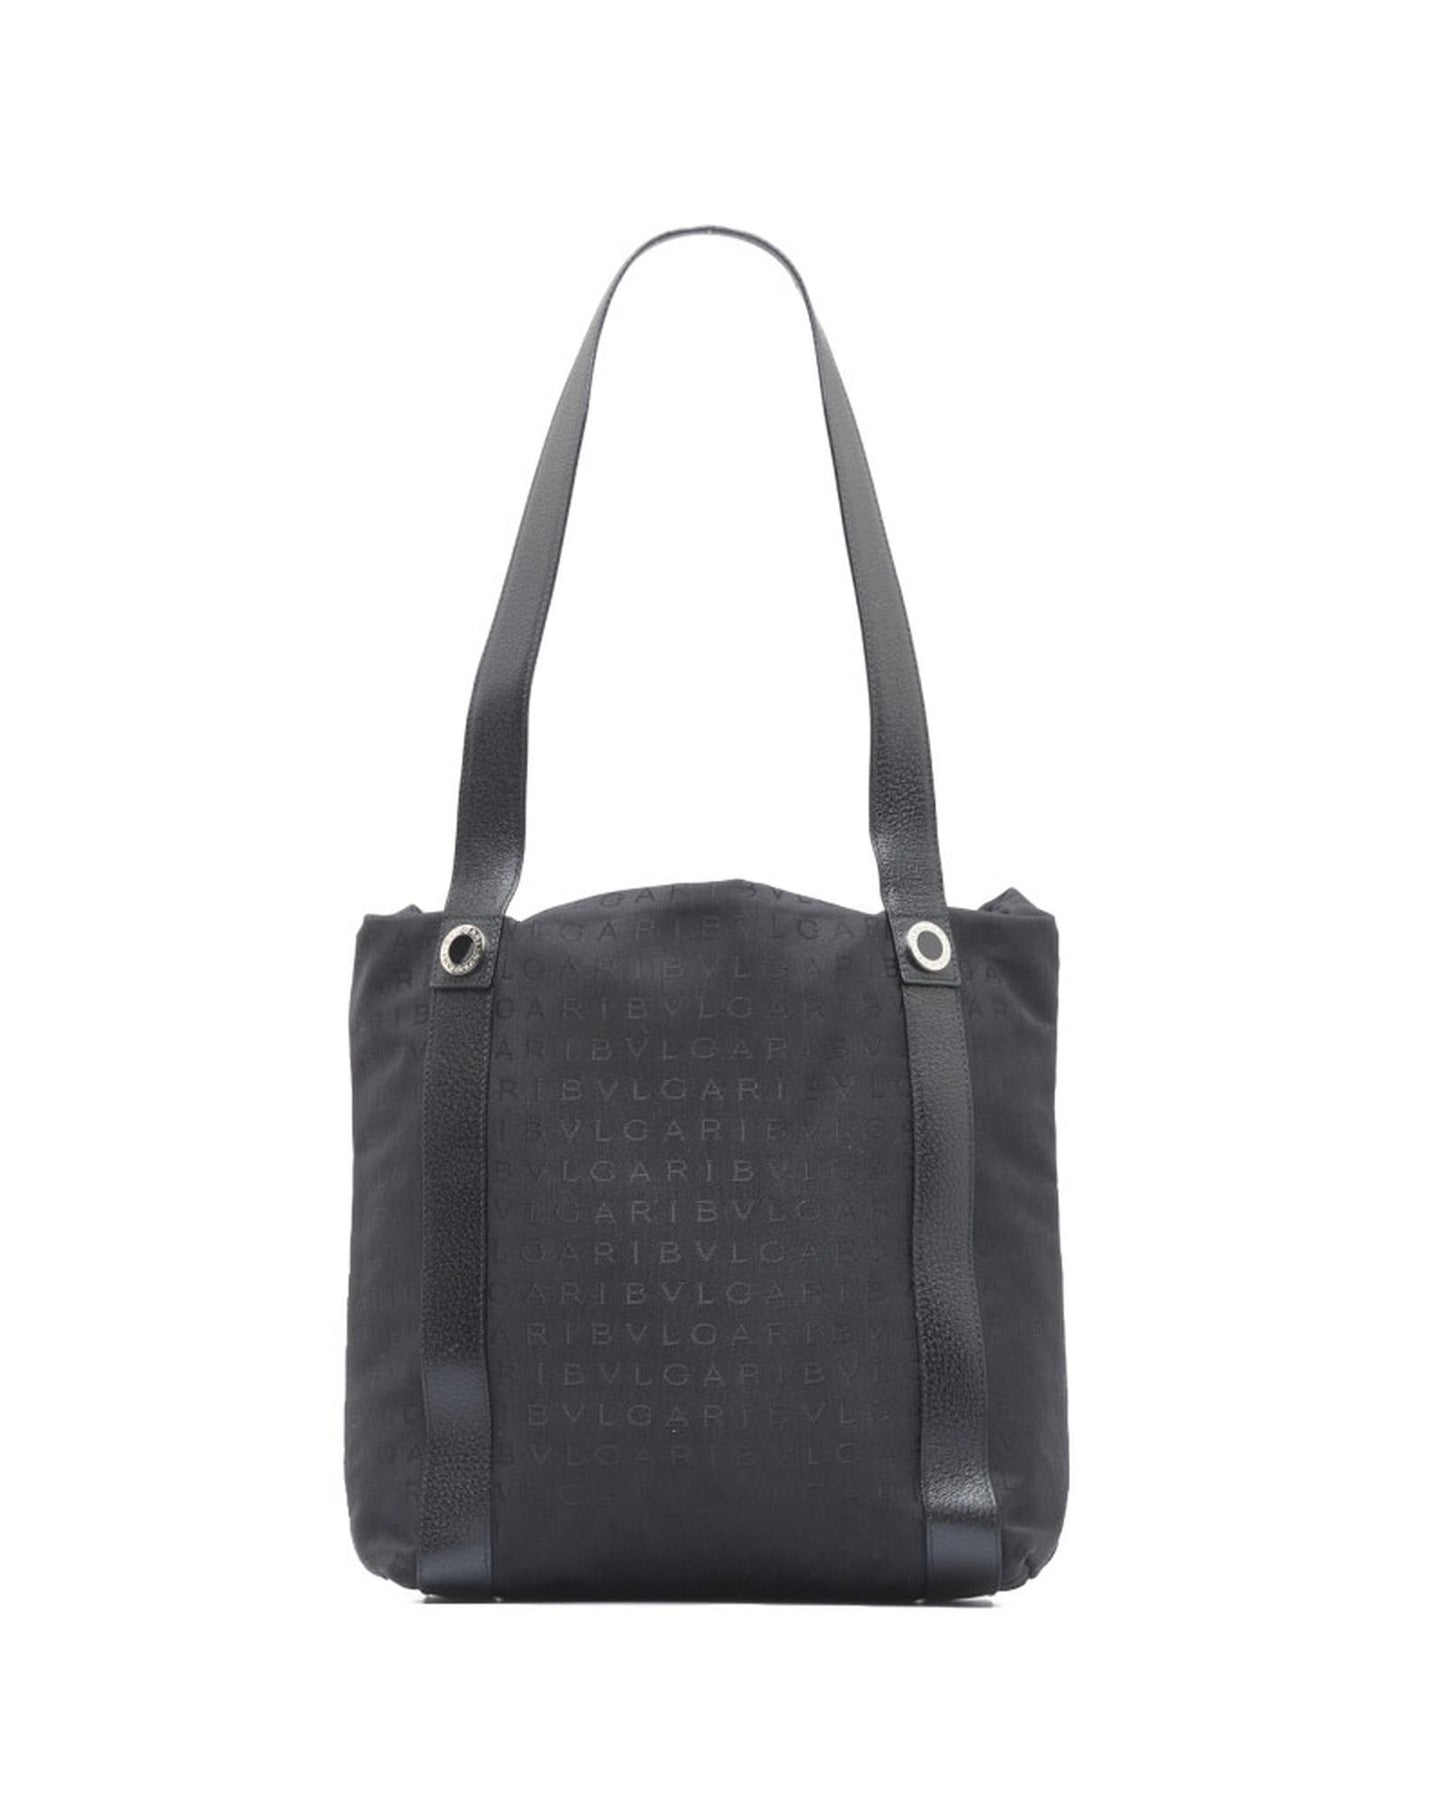 Bvlgari Women's Logo Canvas Tote Bag in Excellent Condition in Black